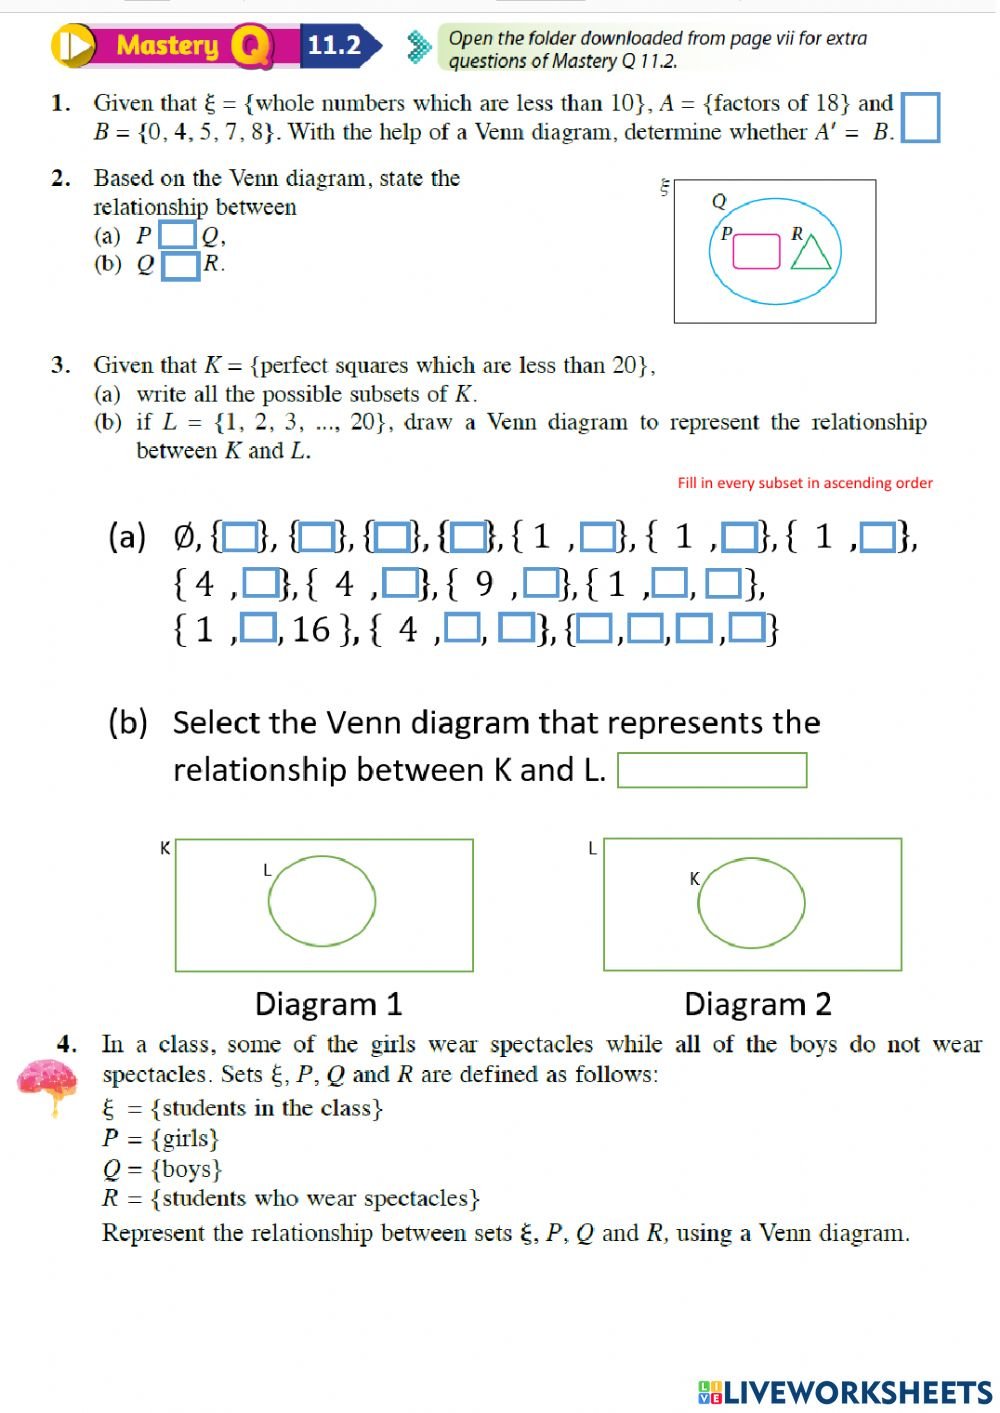 Mastery Questions Worksheet